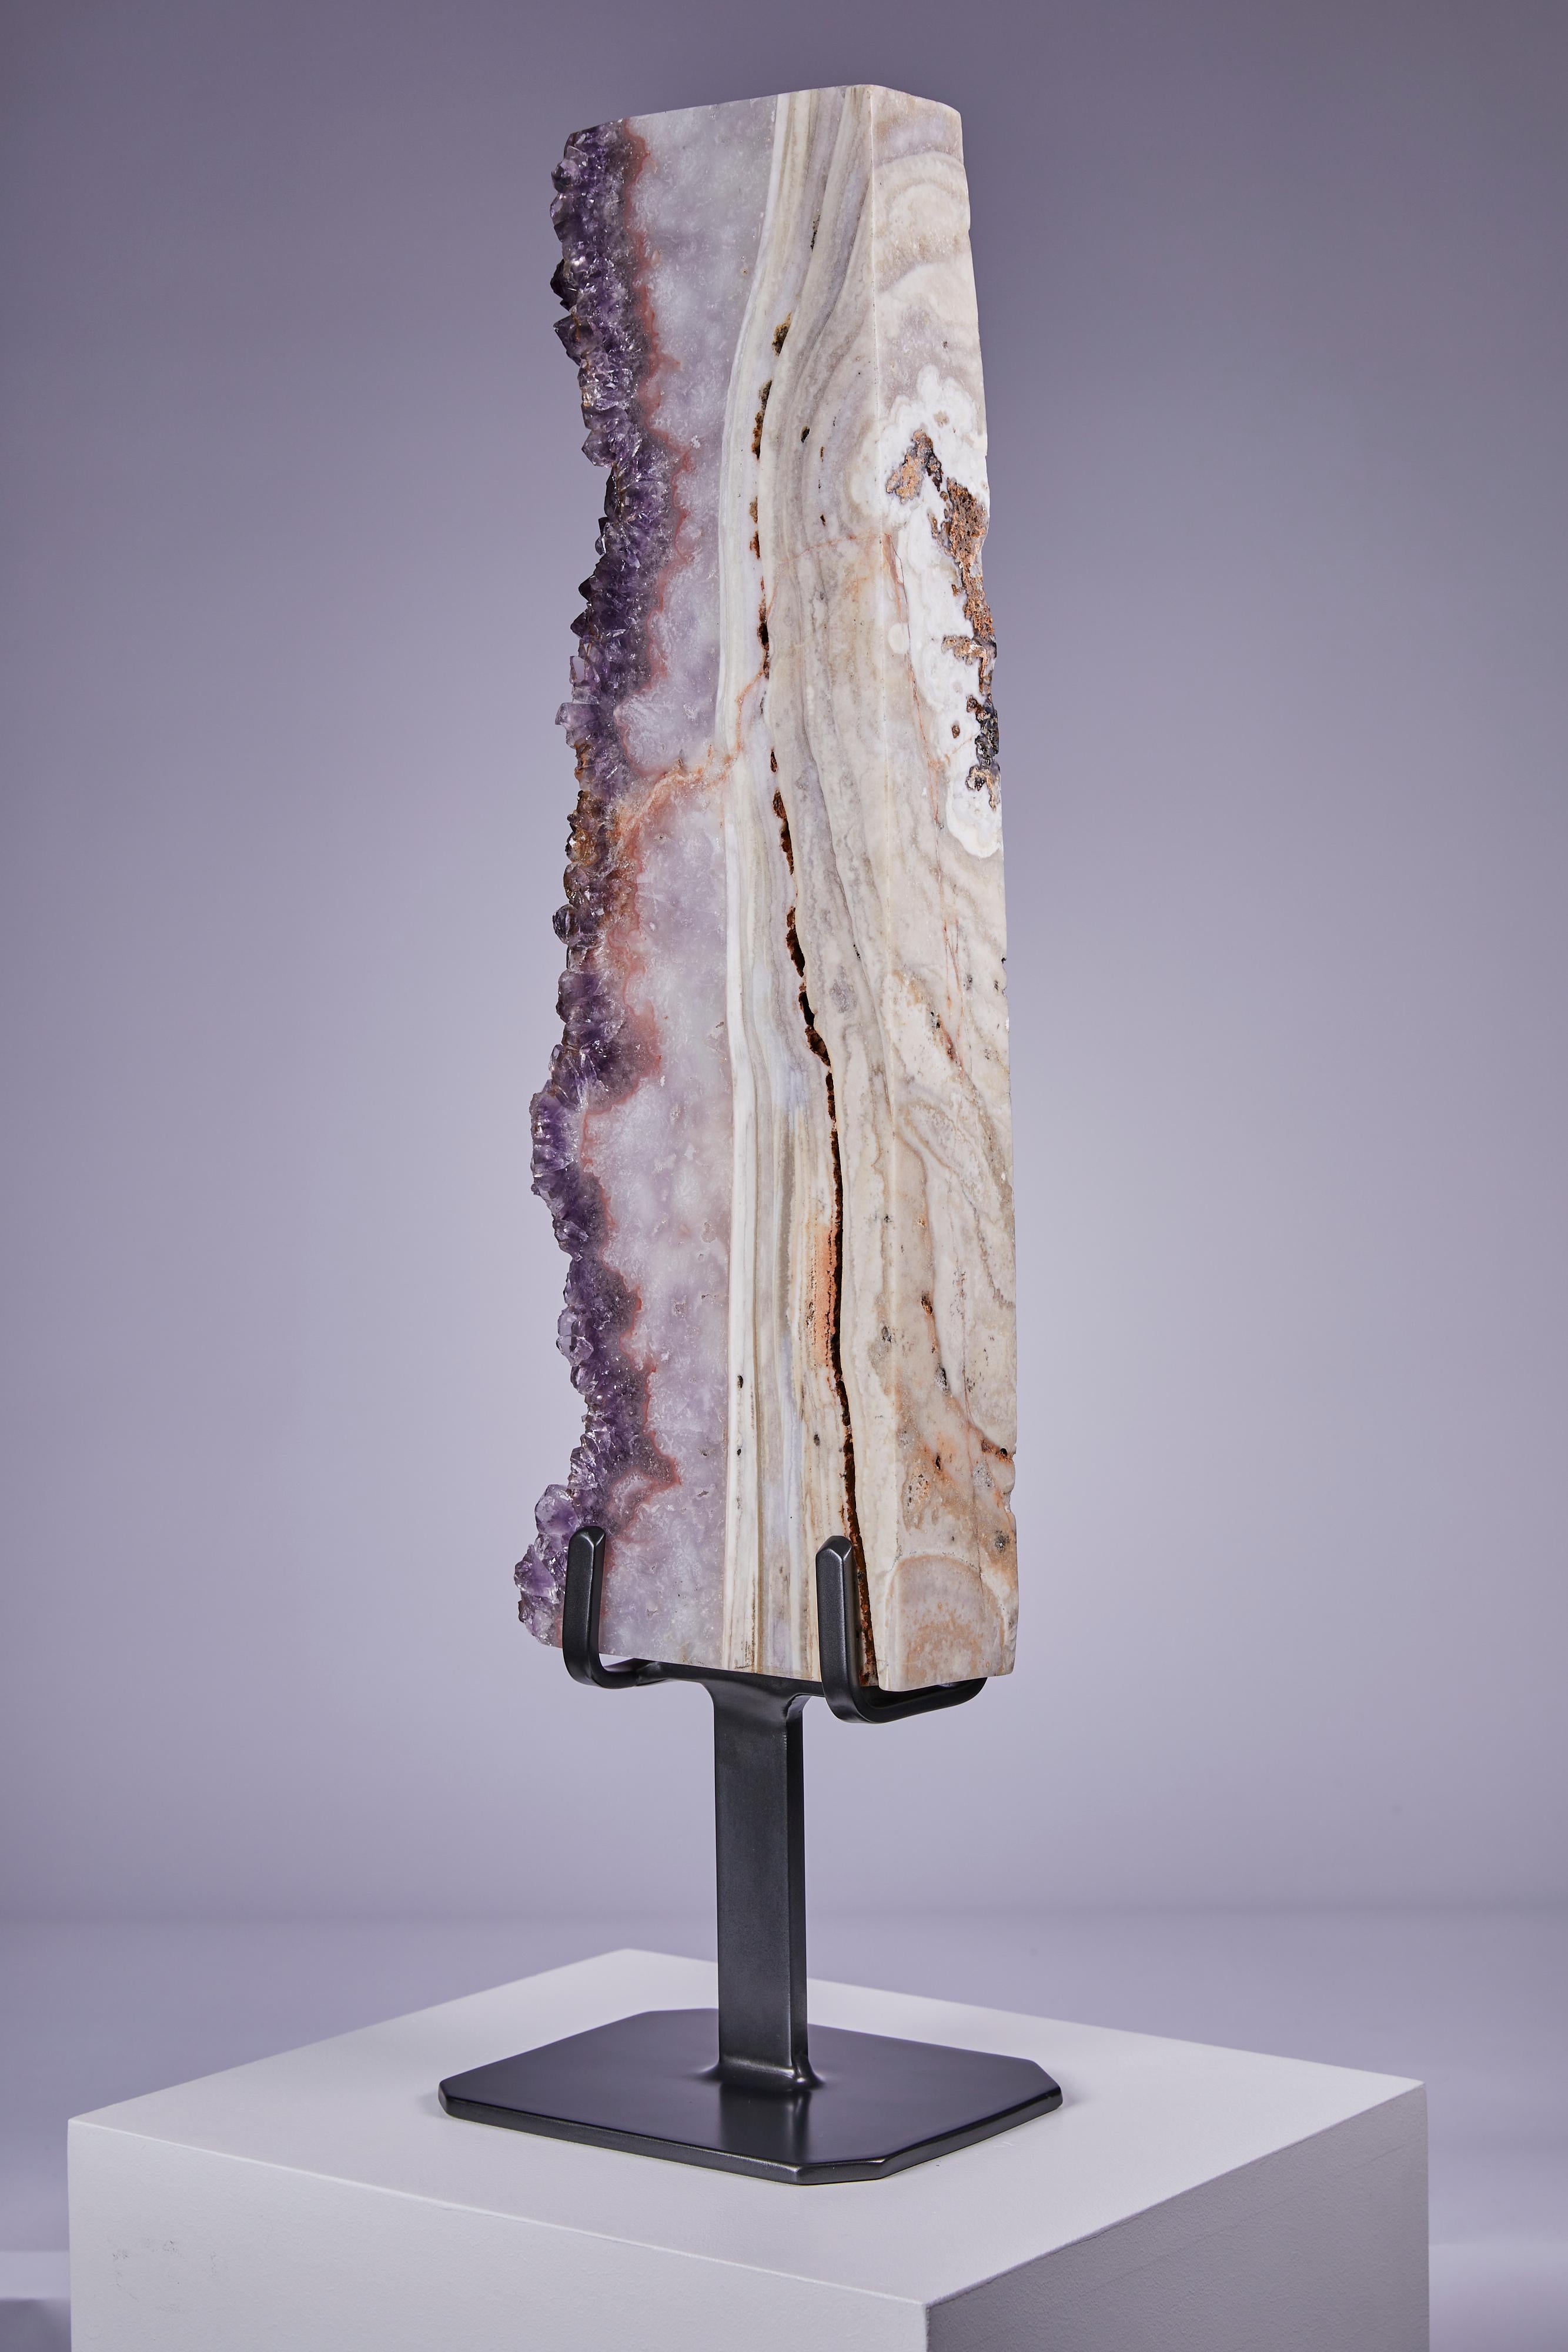 Agate Large columnar agate and amethyst formation For Sale